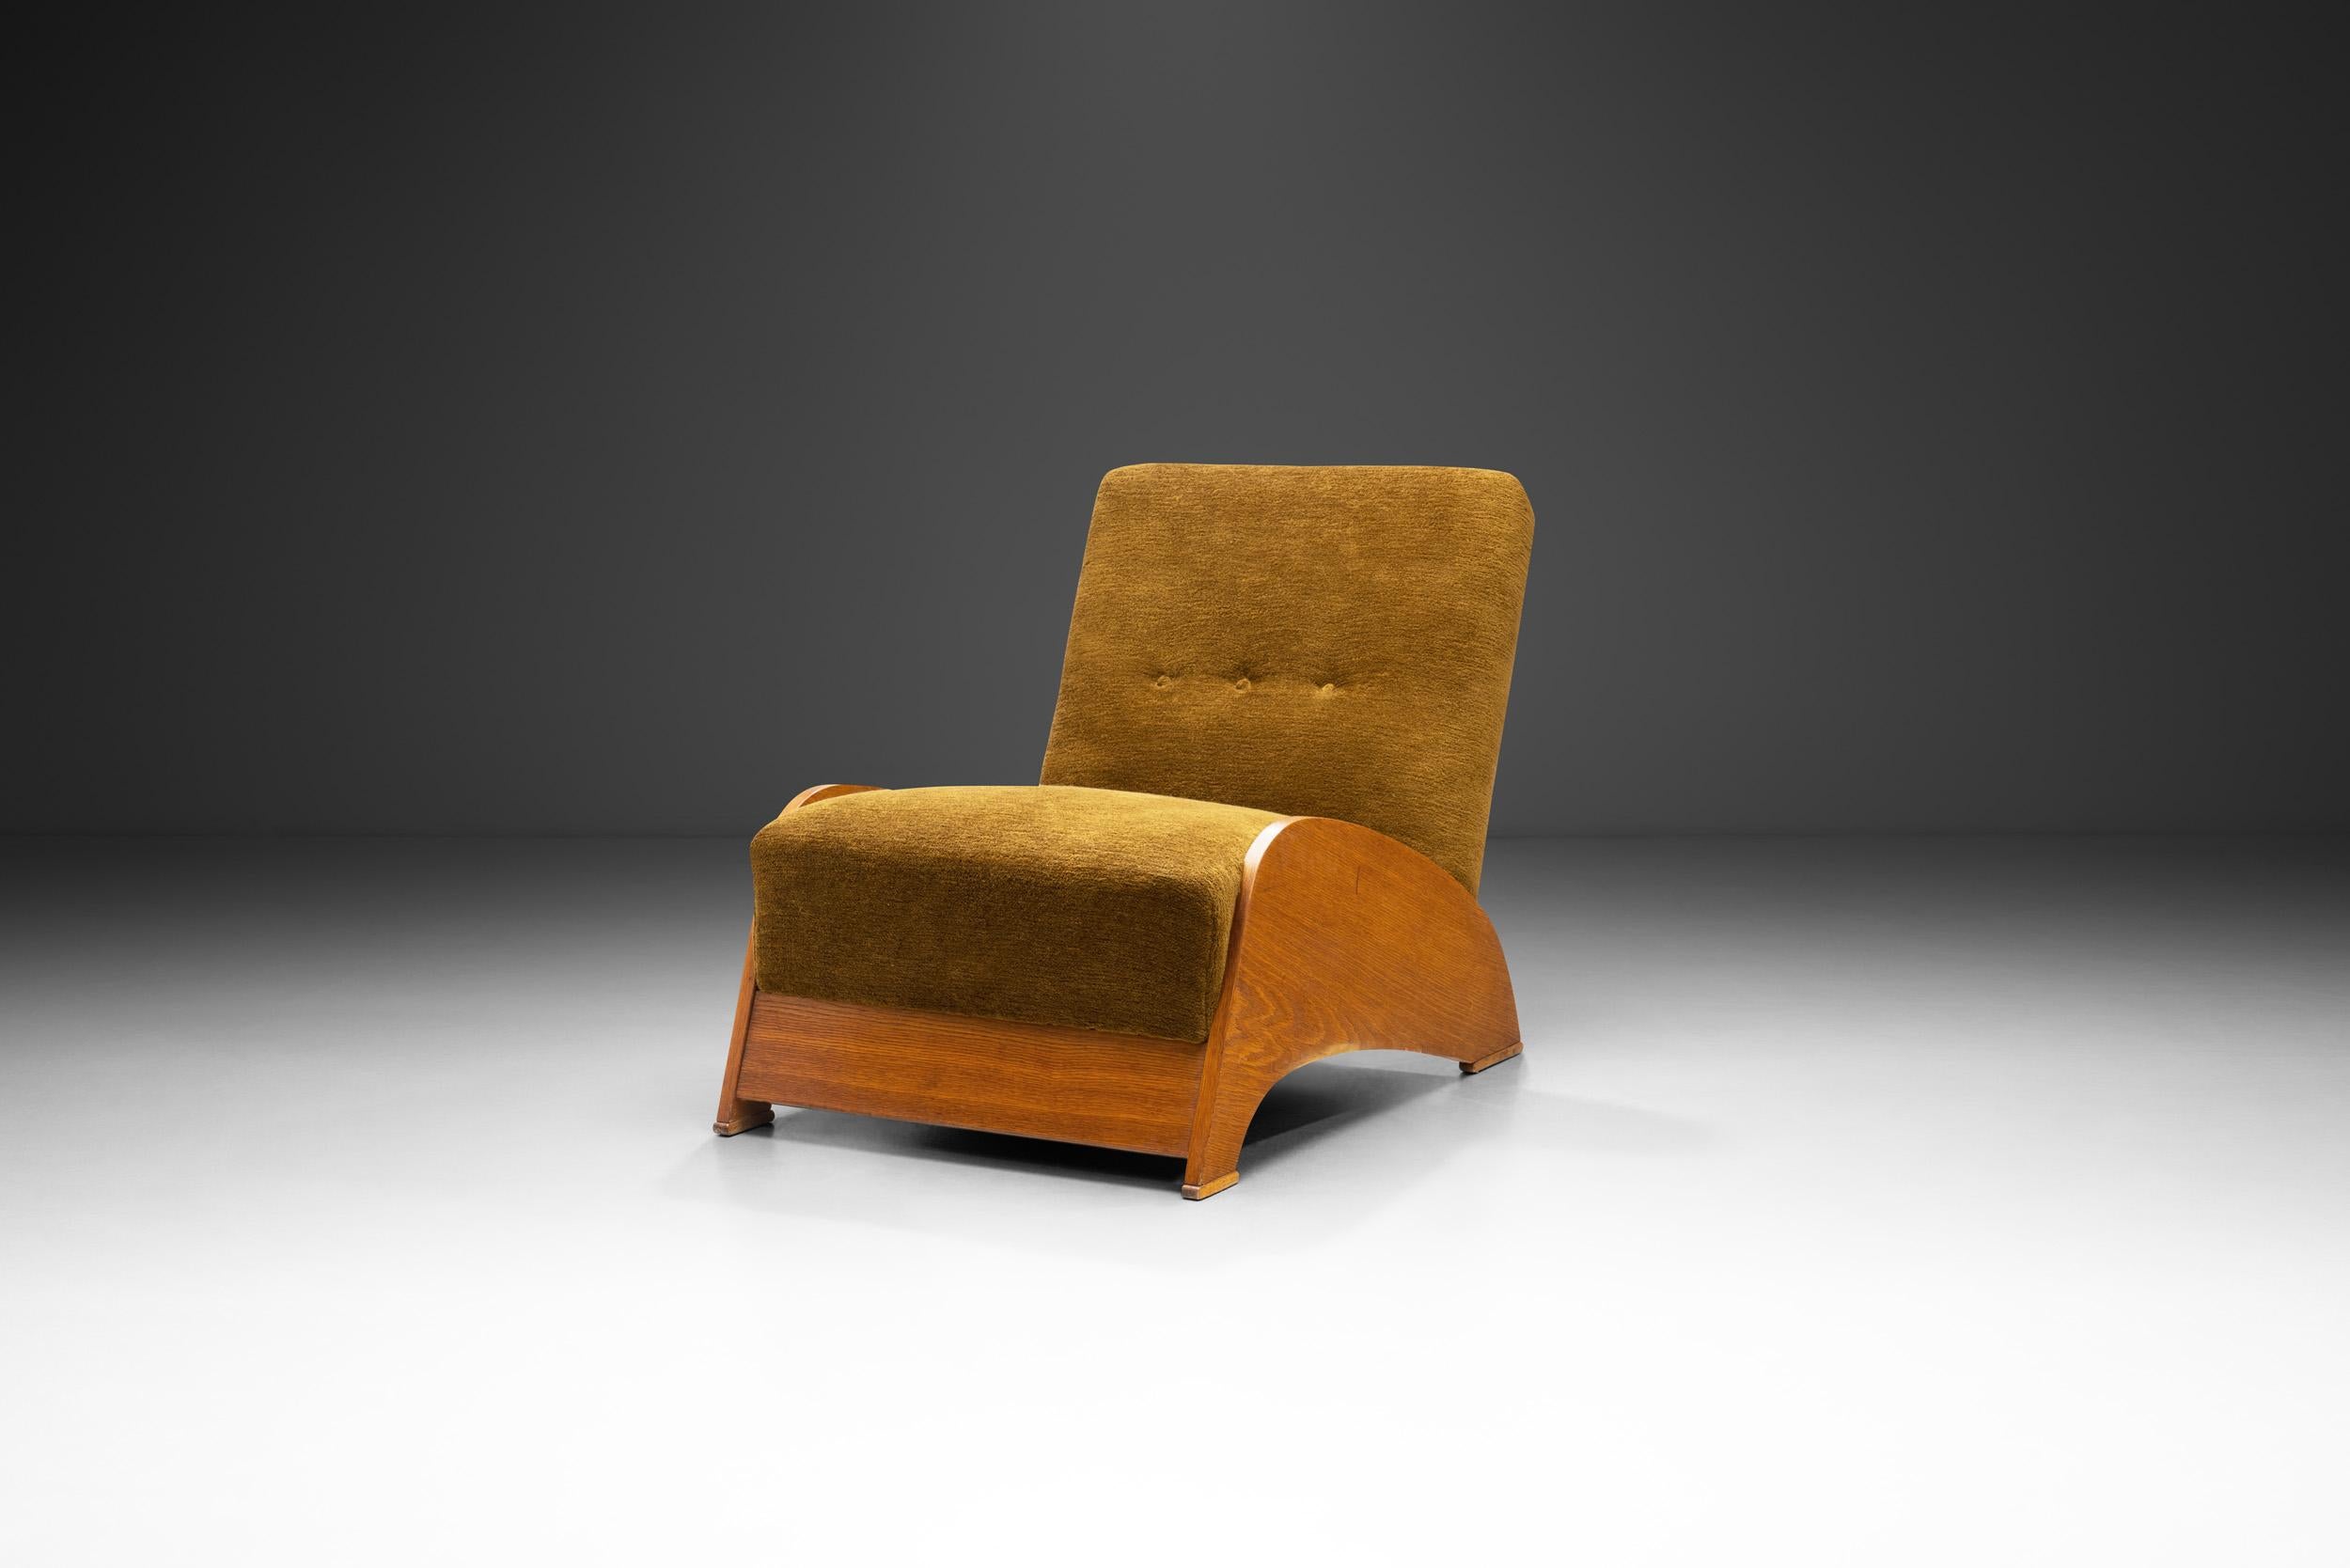 In the inventive and experimentative ethos of 1960s Europe is materialized in this remarkable lounge chair. This sculptural oak chair can be seamlessly integrated into any aesthetic thanks to its artistic impression. This unique mid-century marvel,